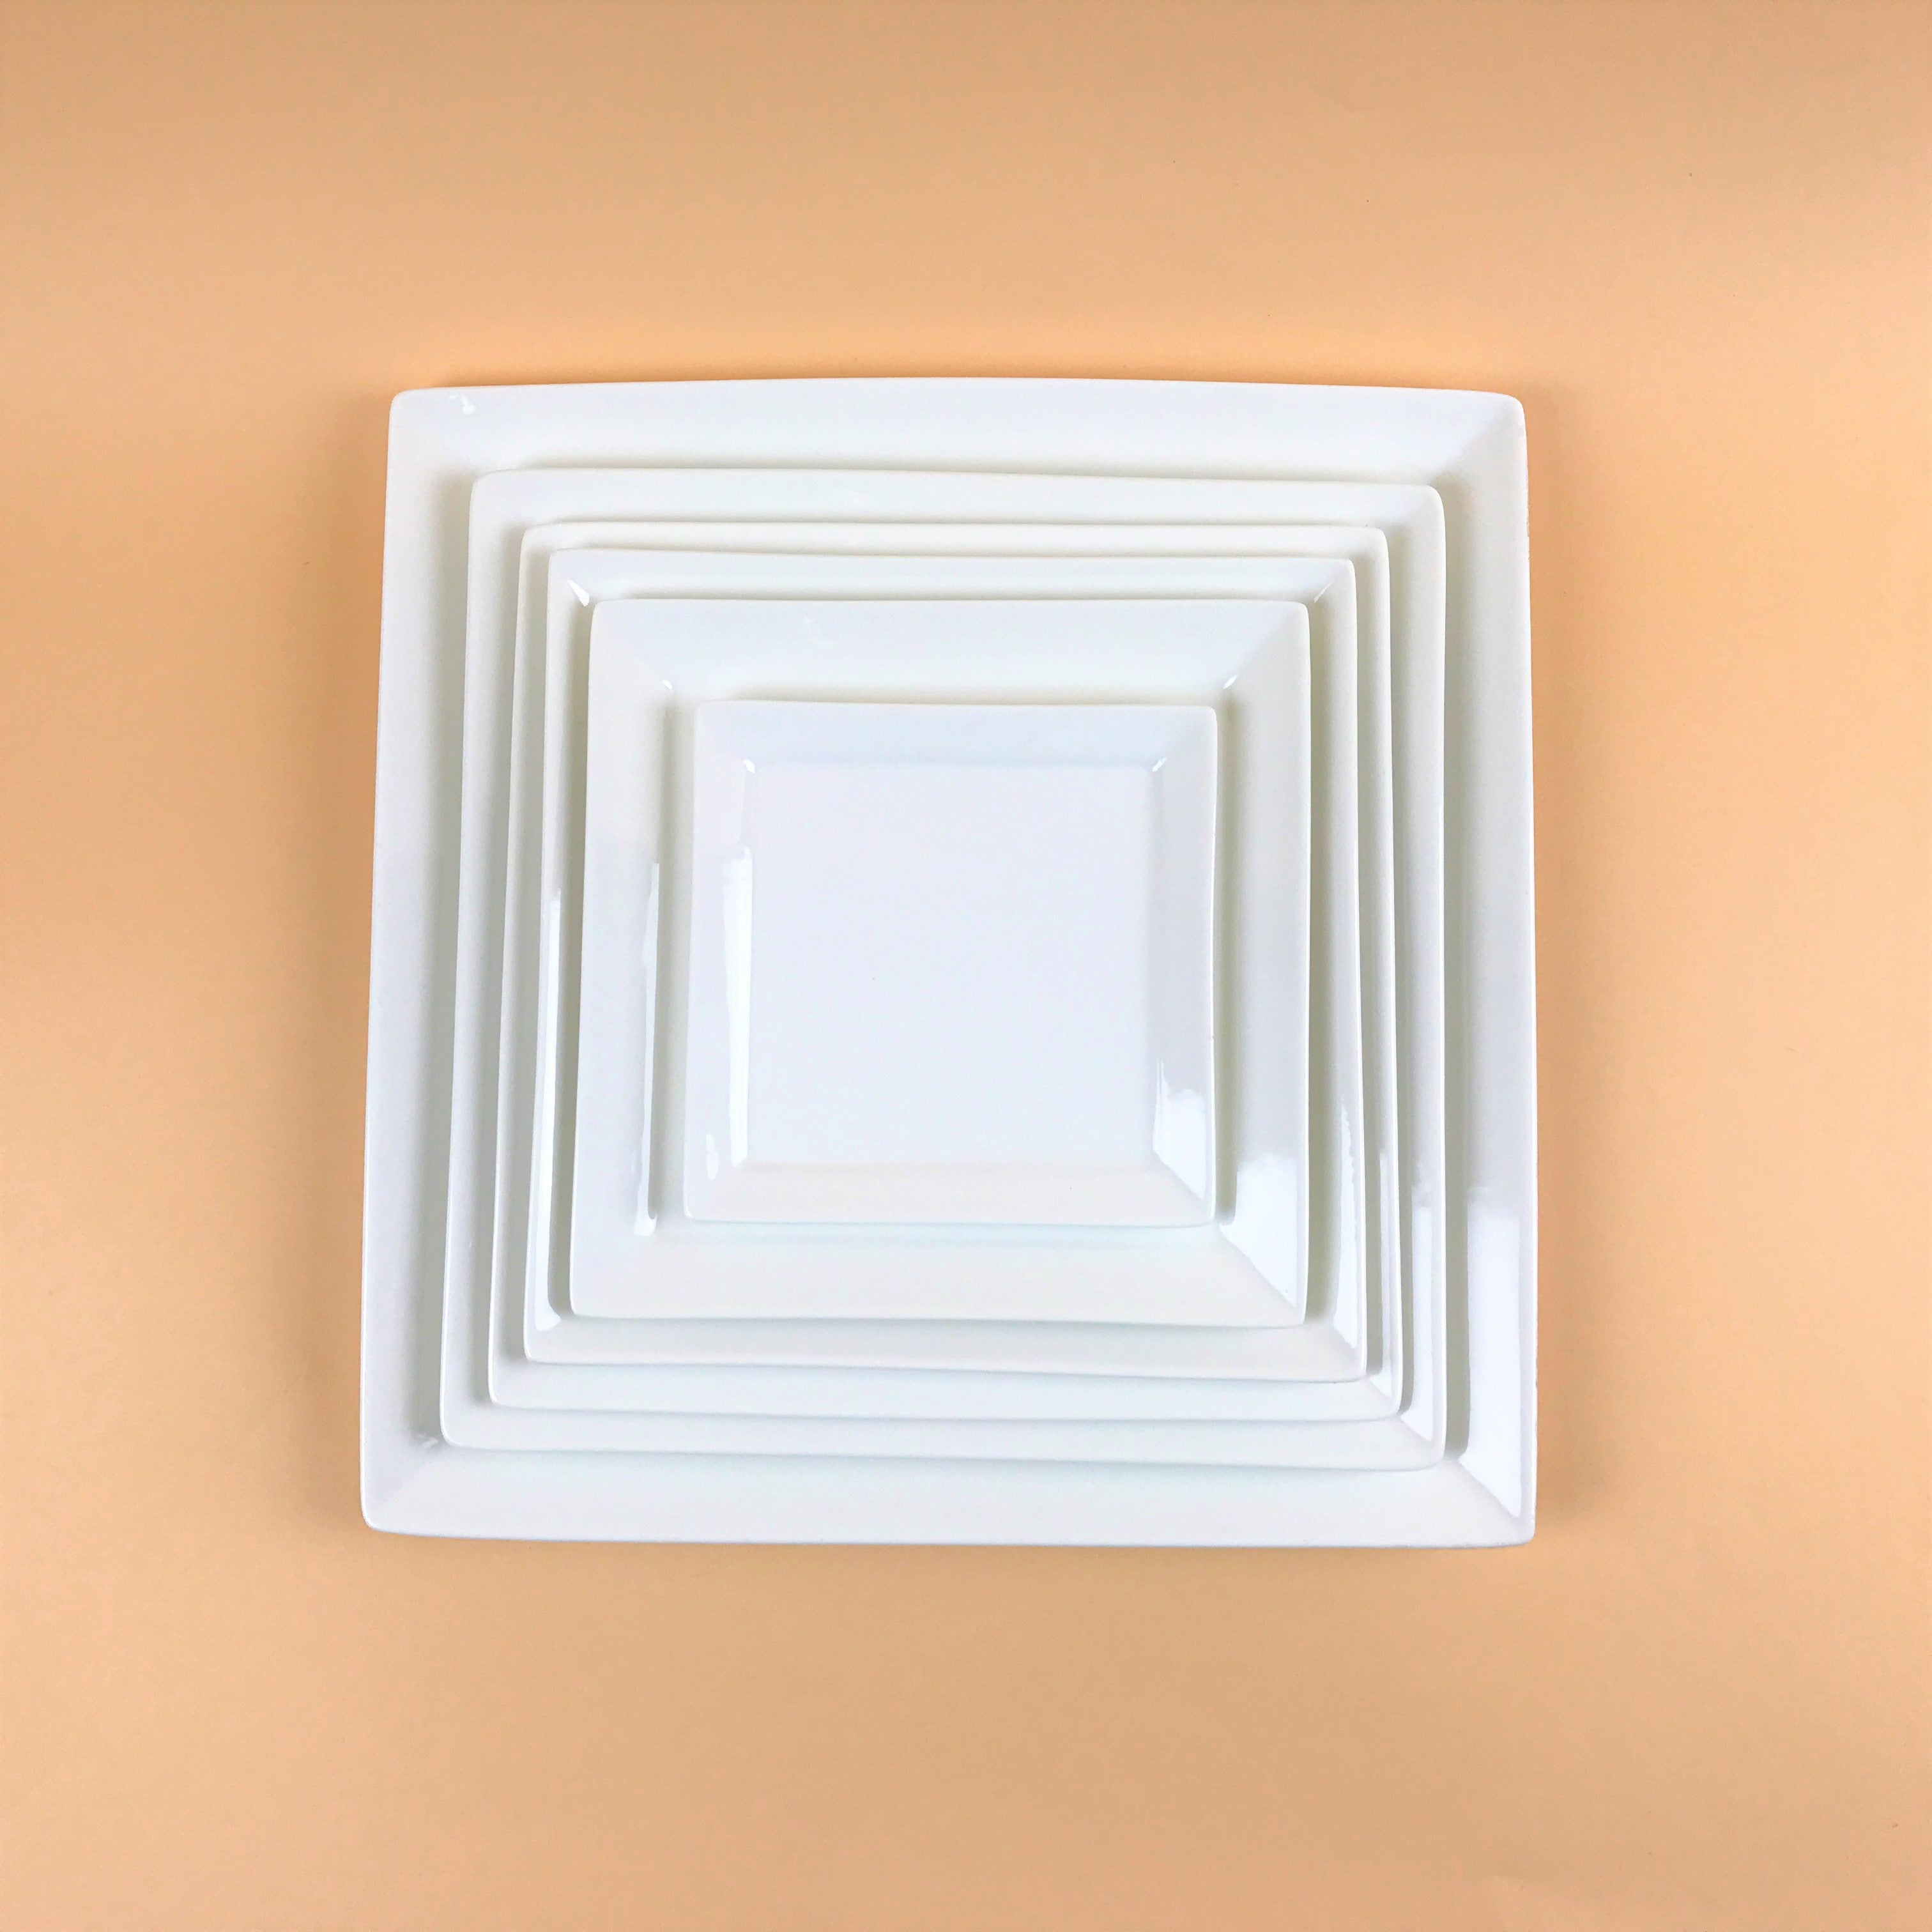 Durable White Restaurant Square Rectangle Plates Discount Sale Restaurant Supply Bowery OSARA New York